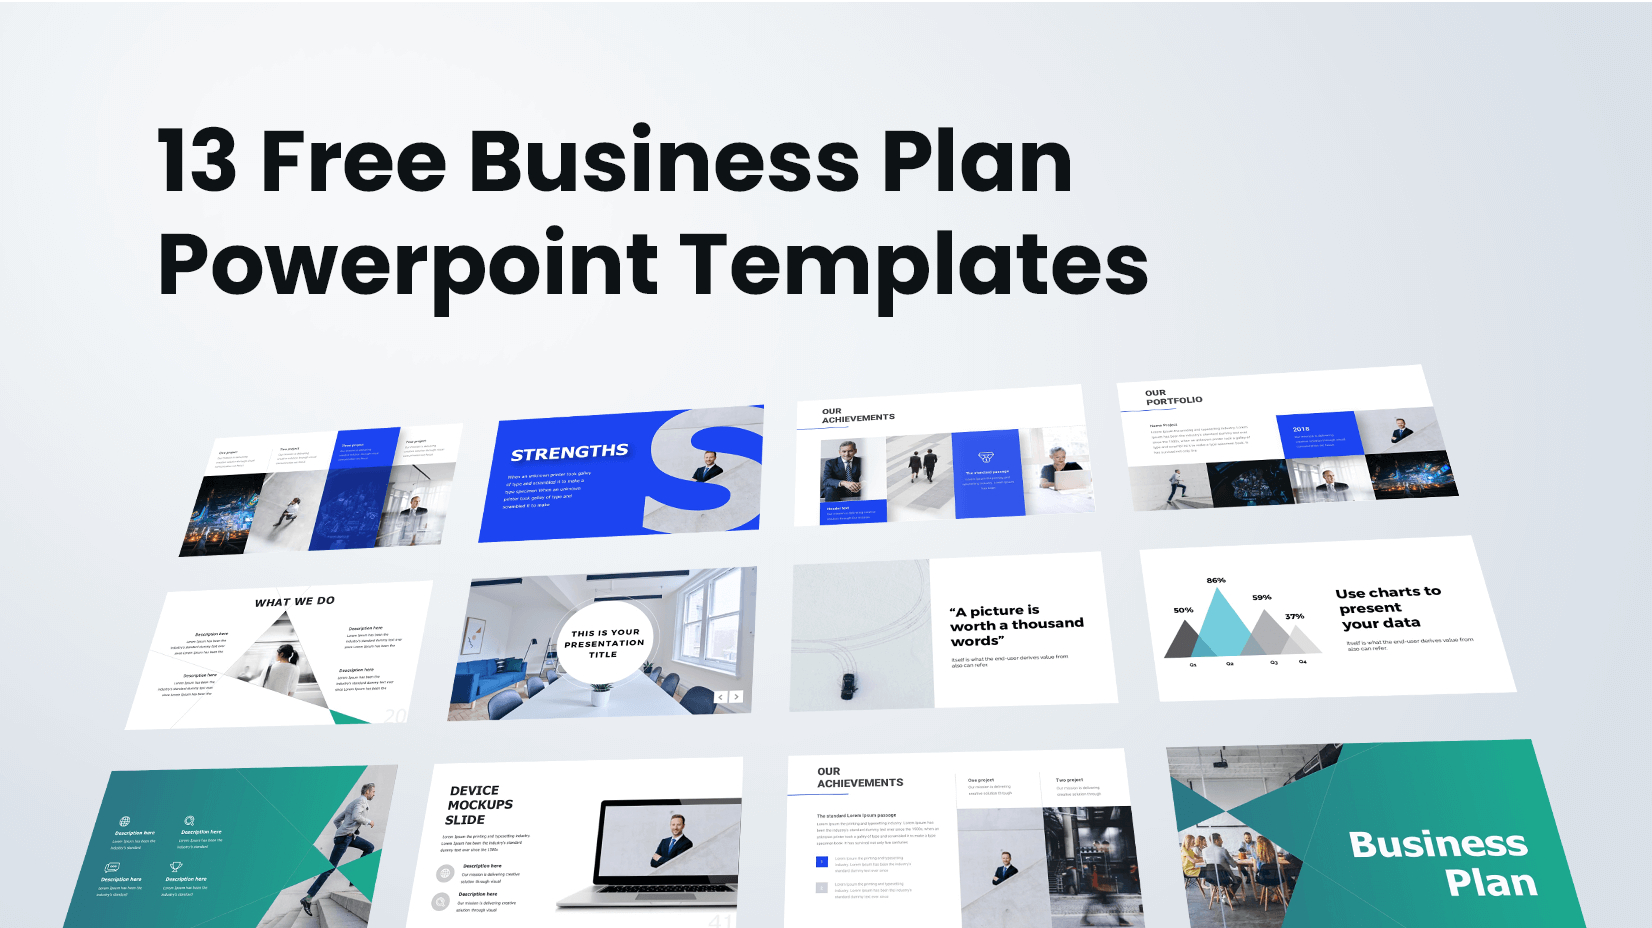 13 Free Business Plan Powerpoint Templates To Get Now Within How To Design A Powerpoint Template